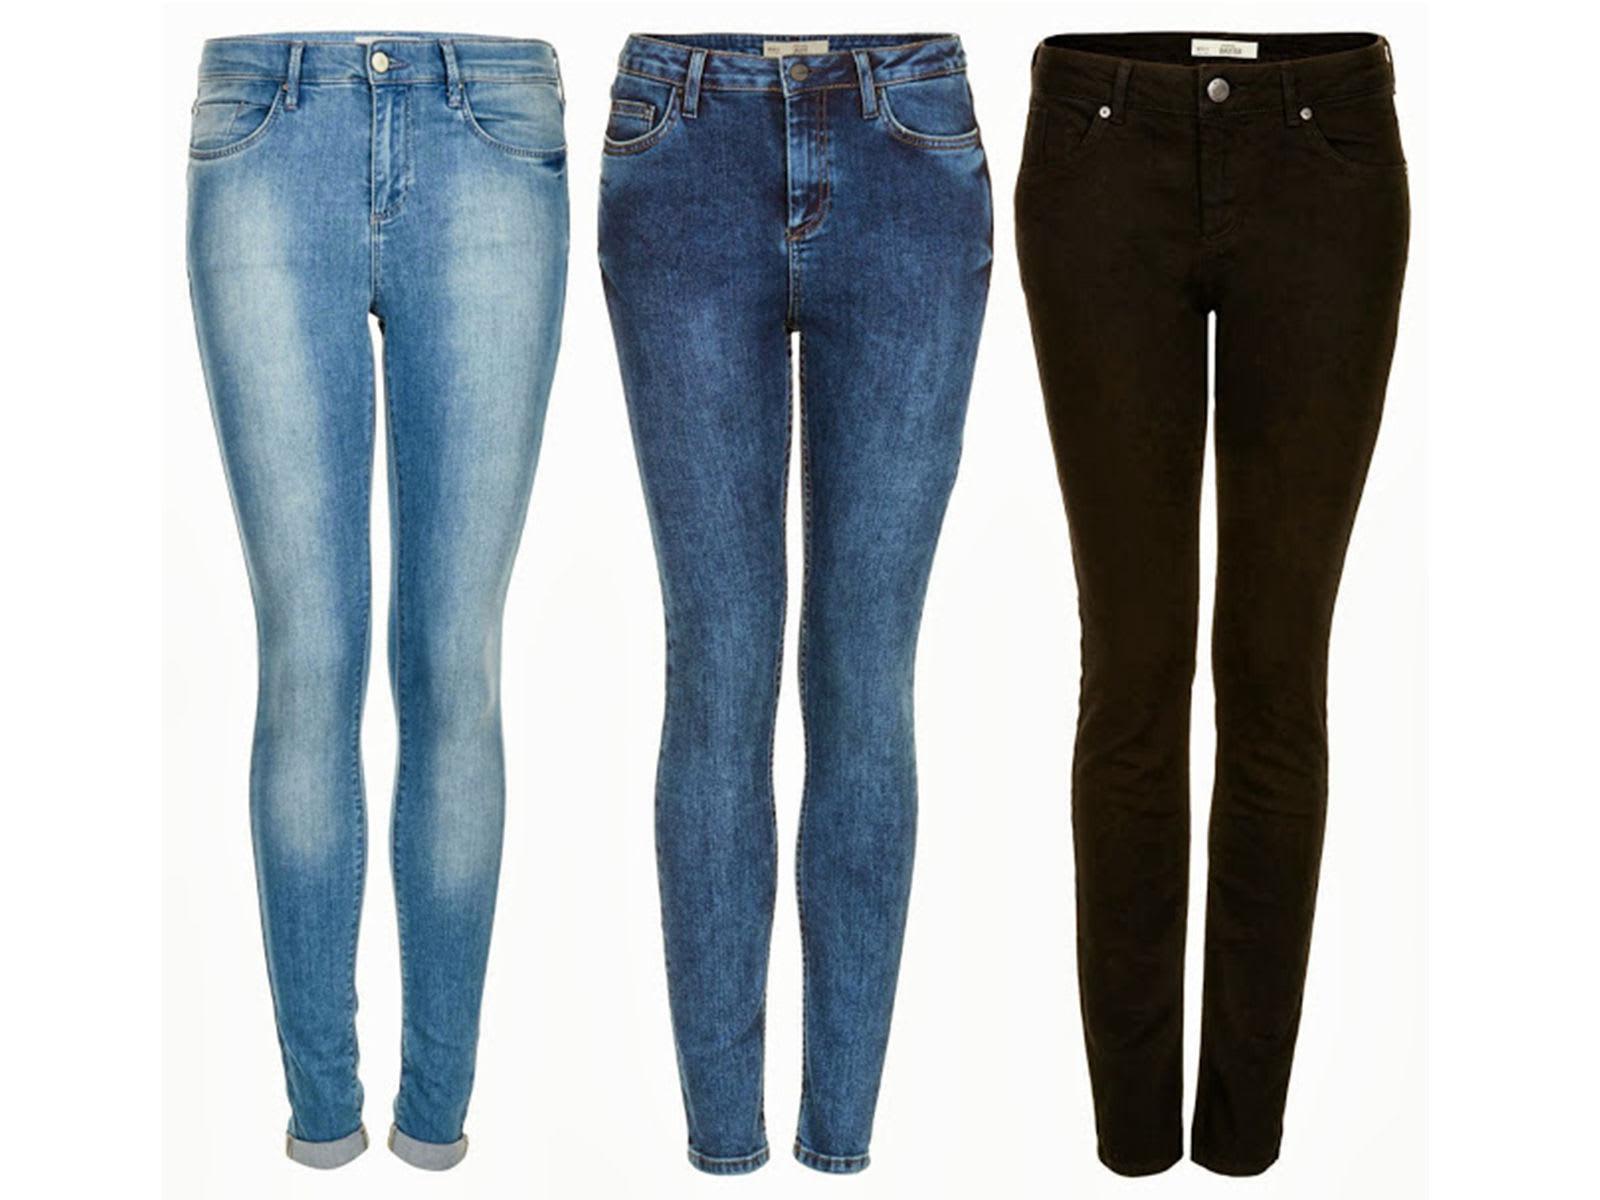 Fashion victim: skinny jeans could be hurting your legs and feet | South  China Morning Post